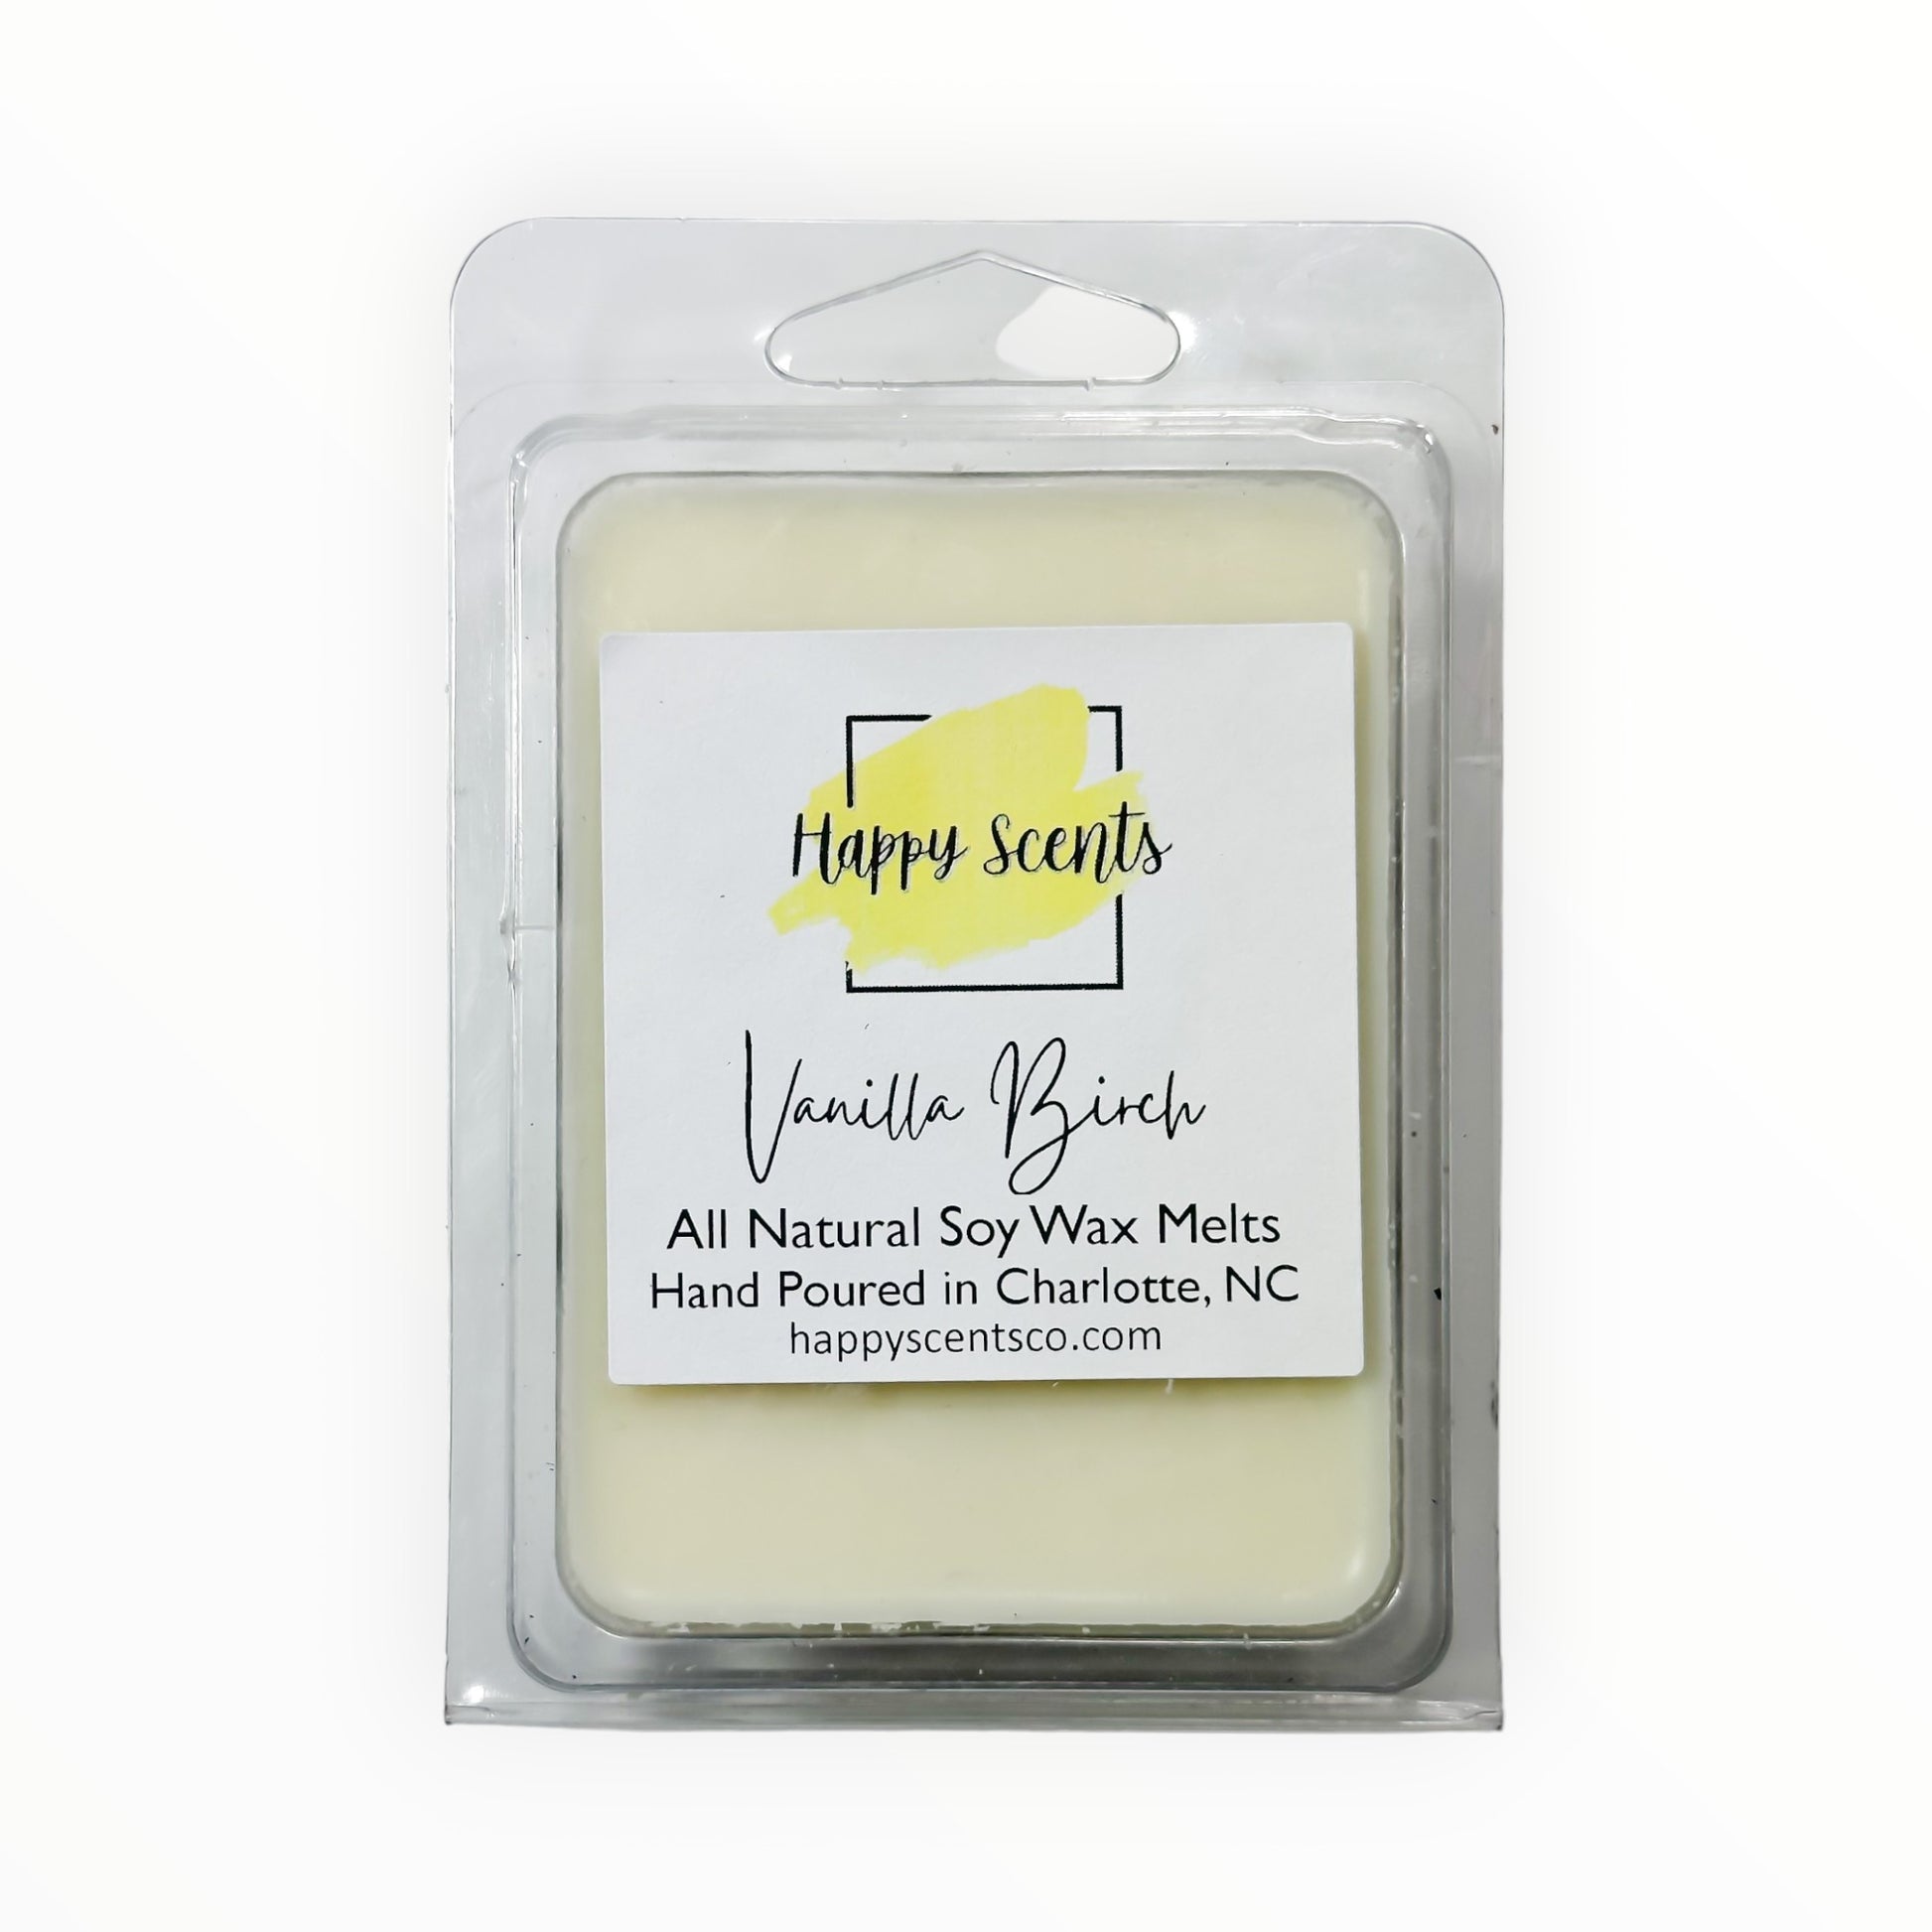 All Natural Soy Clamshell Wax Melts